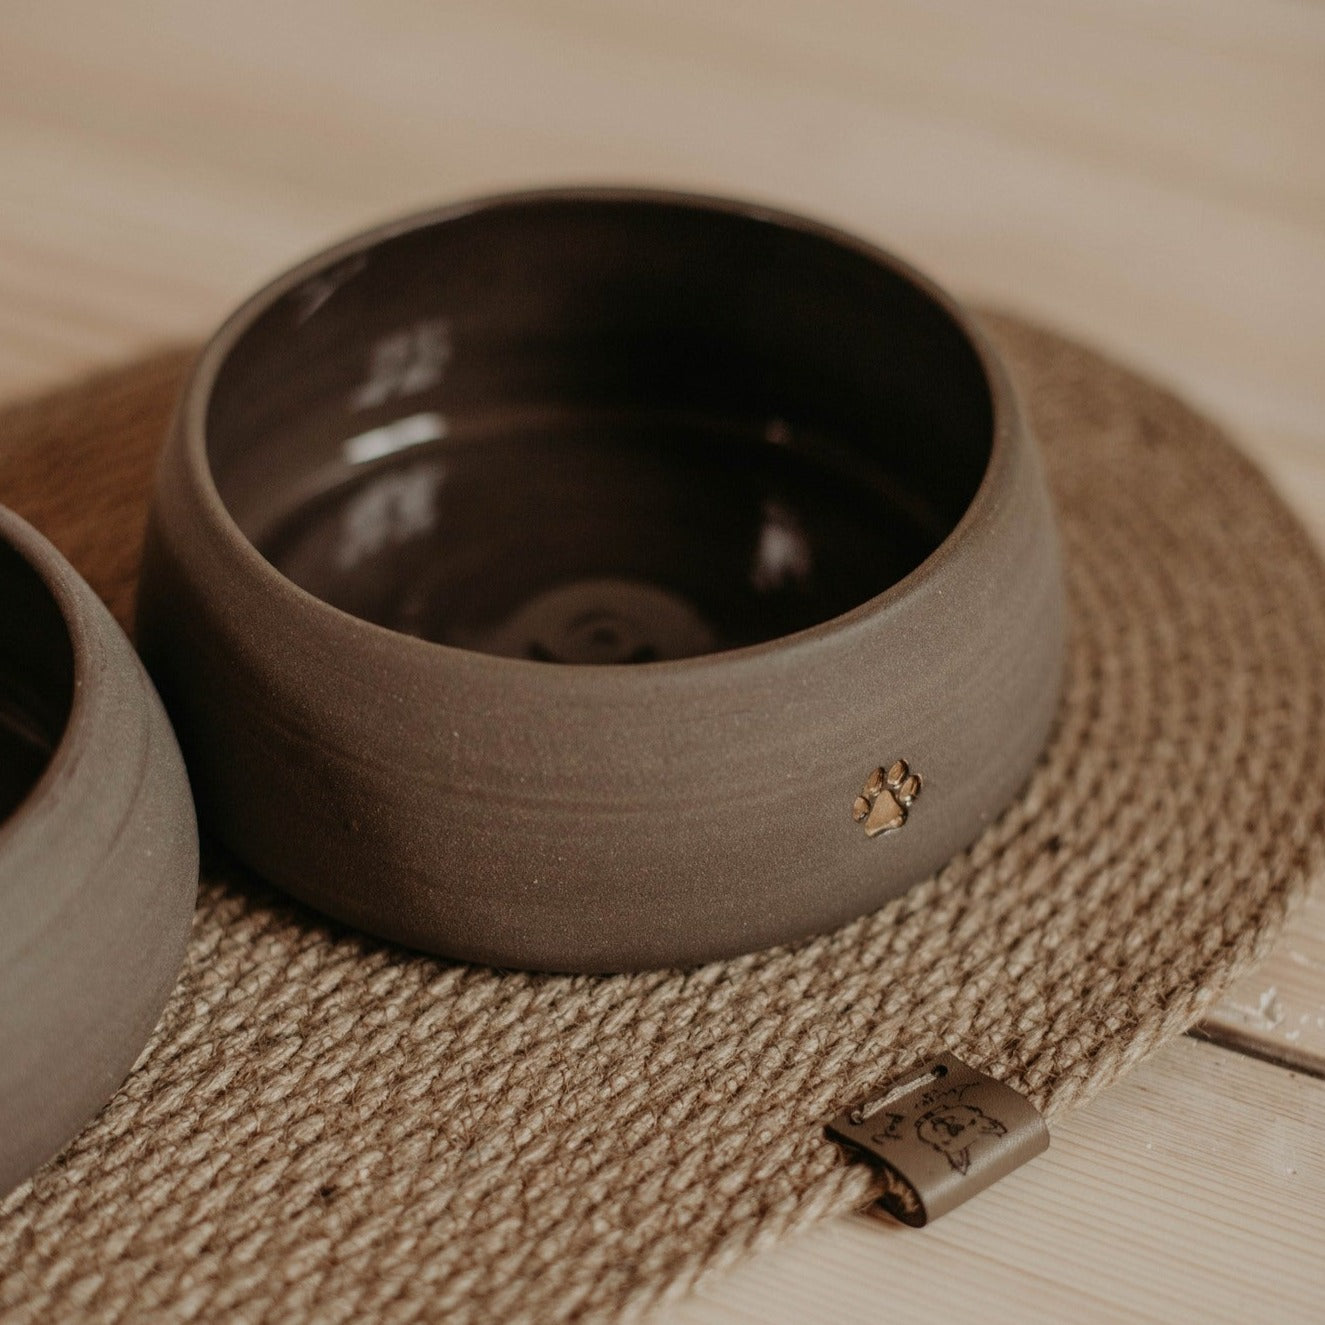 Handmade Ceramic Dog Bowl Set | Gray Stoneware with Paw Stamp | Includes 2 Bowls and Jute Mat